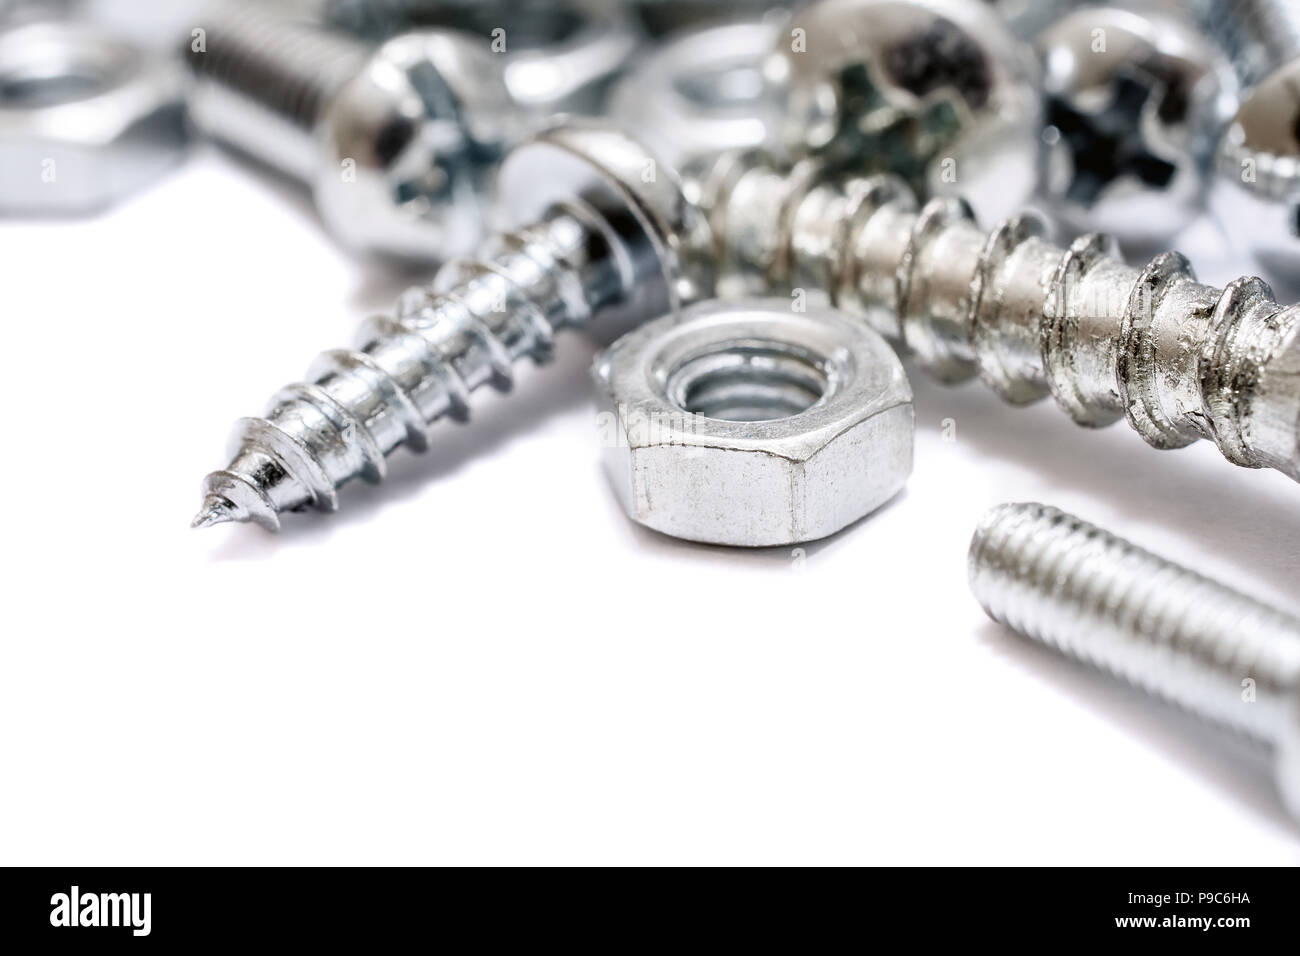 Macro Of A Small Collection Of Iron Screws, Wood Screws And Bolts With Free Space Stock Photo